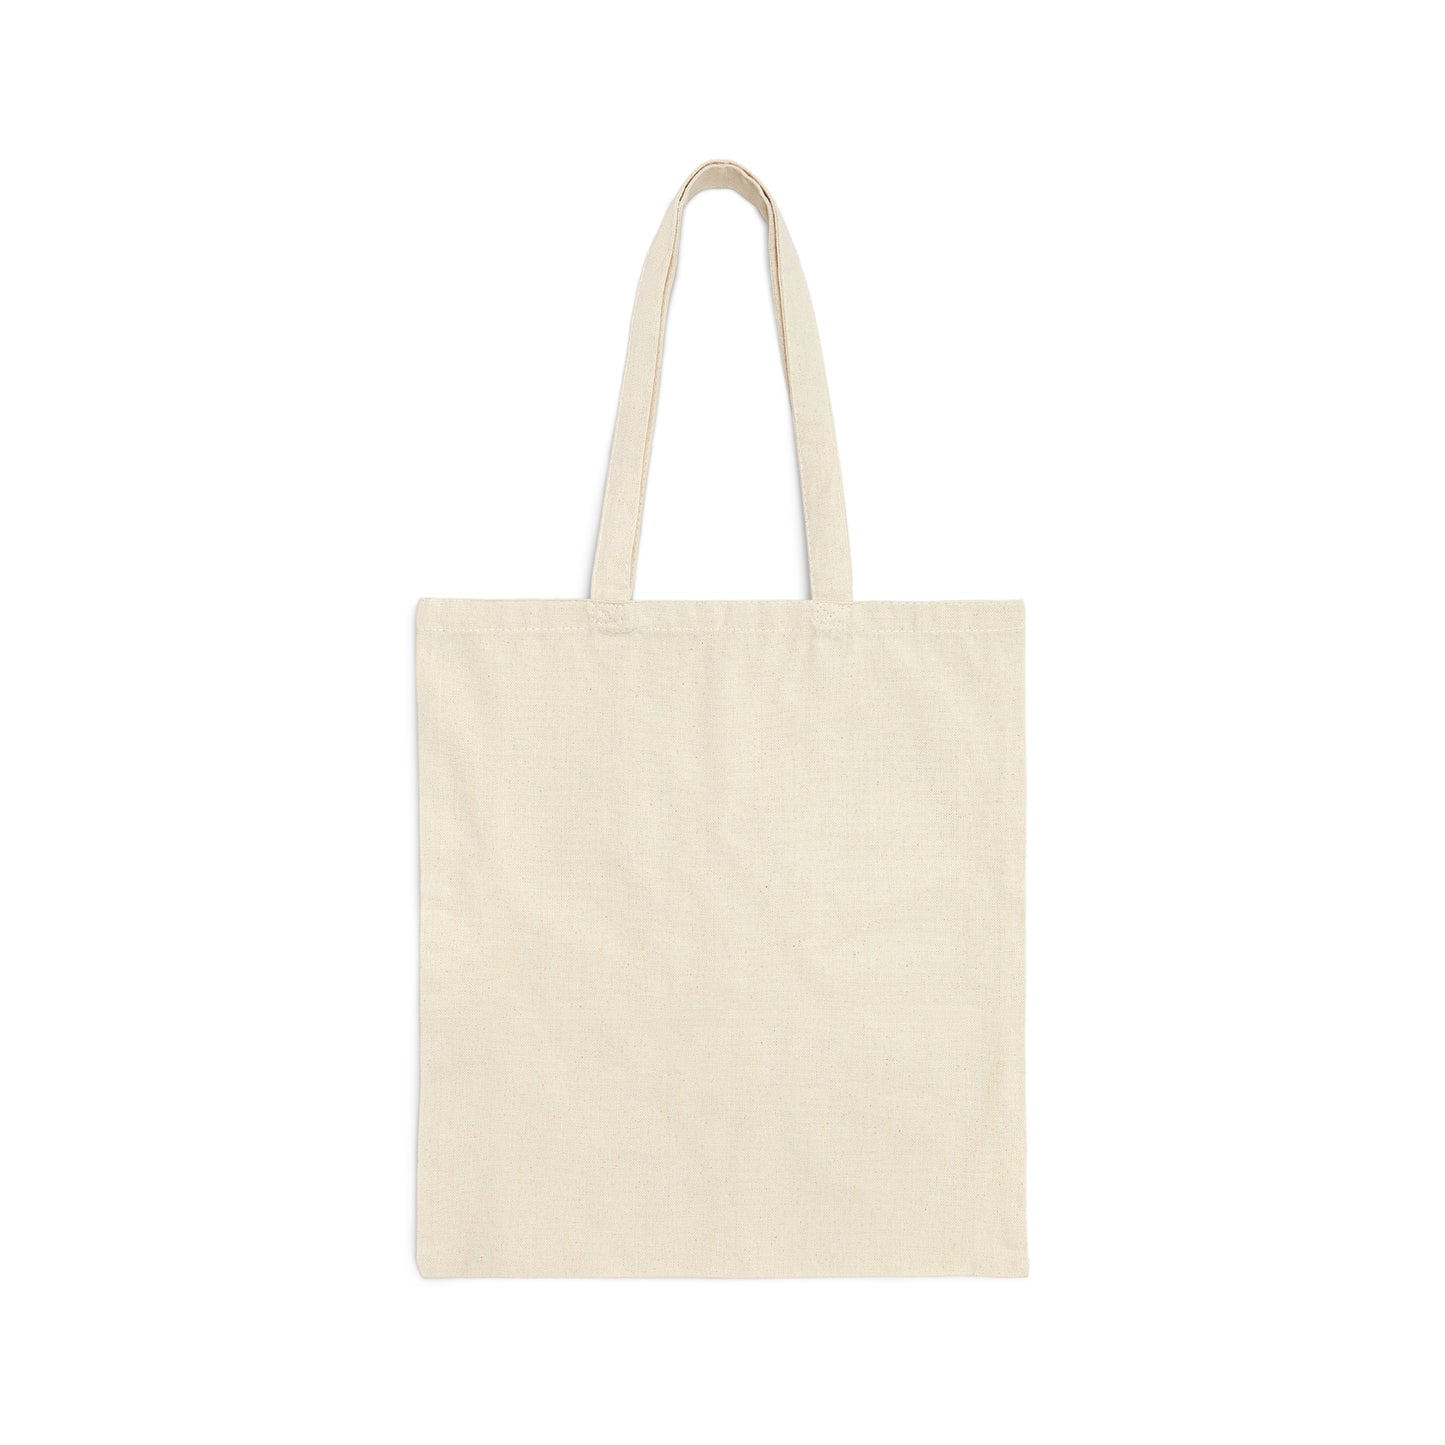 GOING TO CALI  VINYL Cotton Canvas Tote Bag